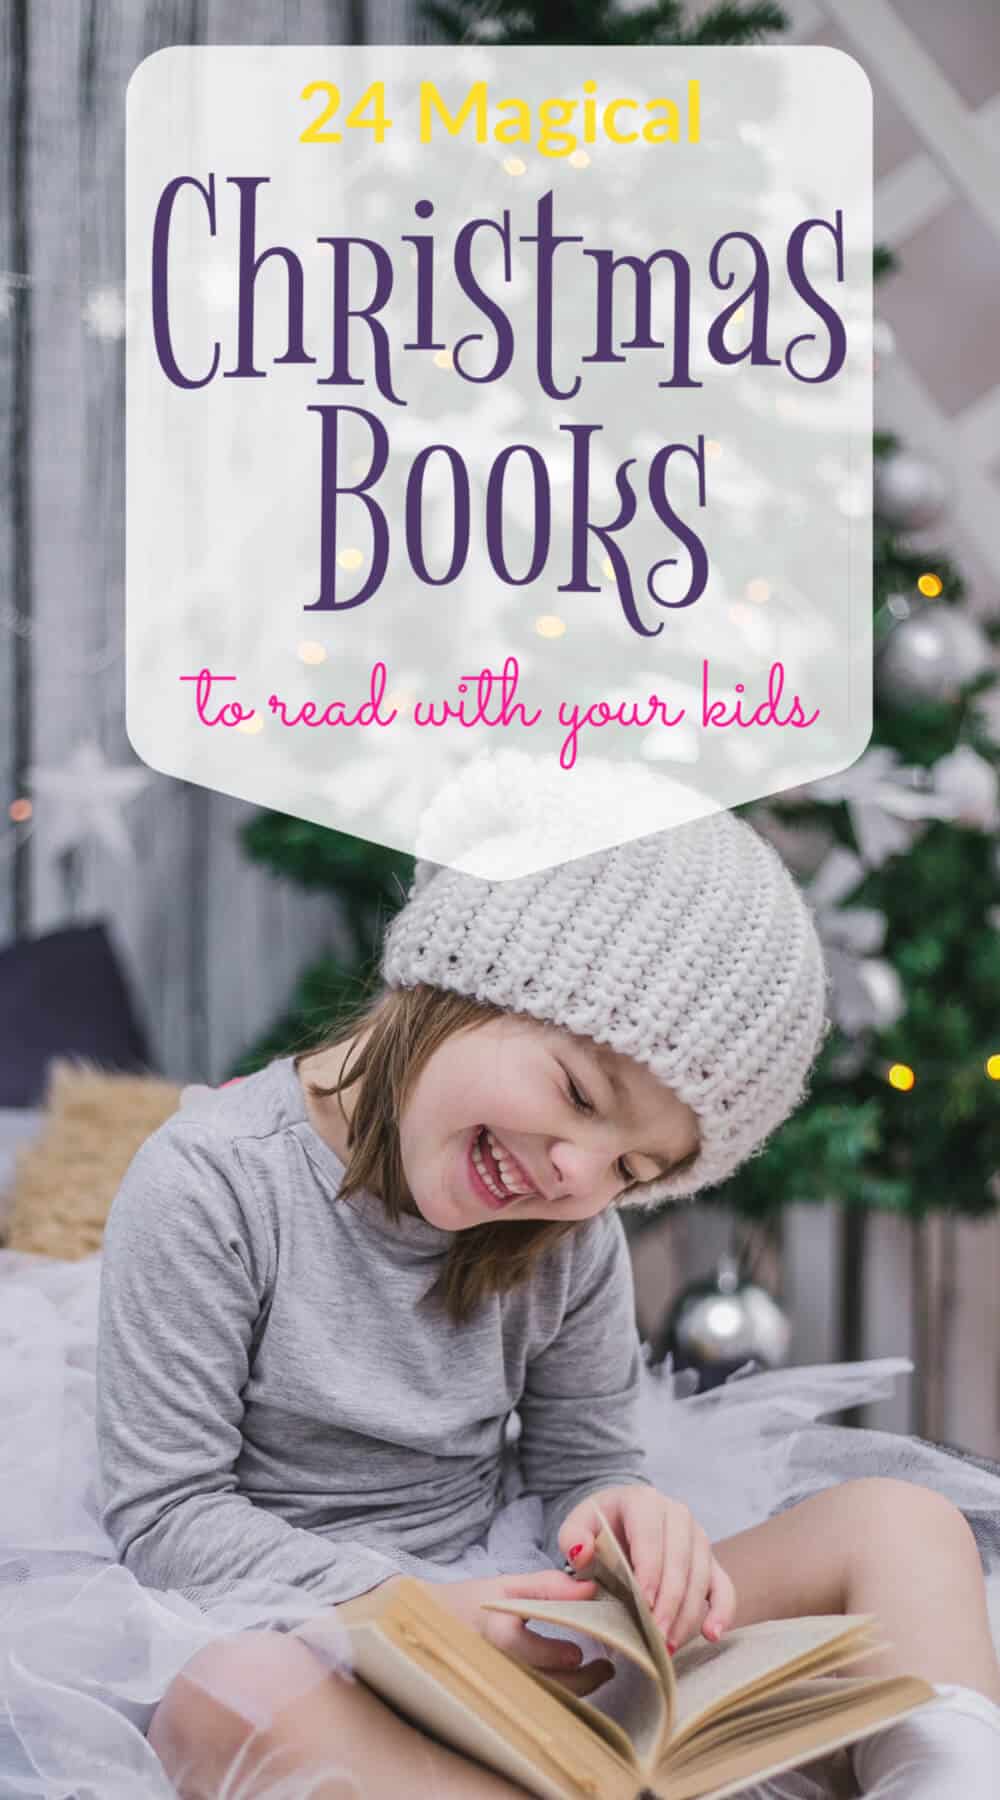 What better way to spend the evening with your kids than sharing a fun Christmas book? With this huge list, you’ll have a book to read each night of the month, making it a perfect way to celebrate the Christmas season.  To add a little more magic, wrap them up and unwrap one to read each night!